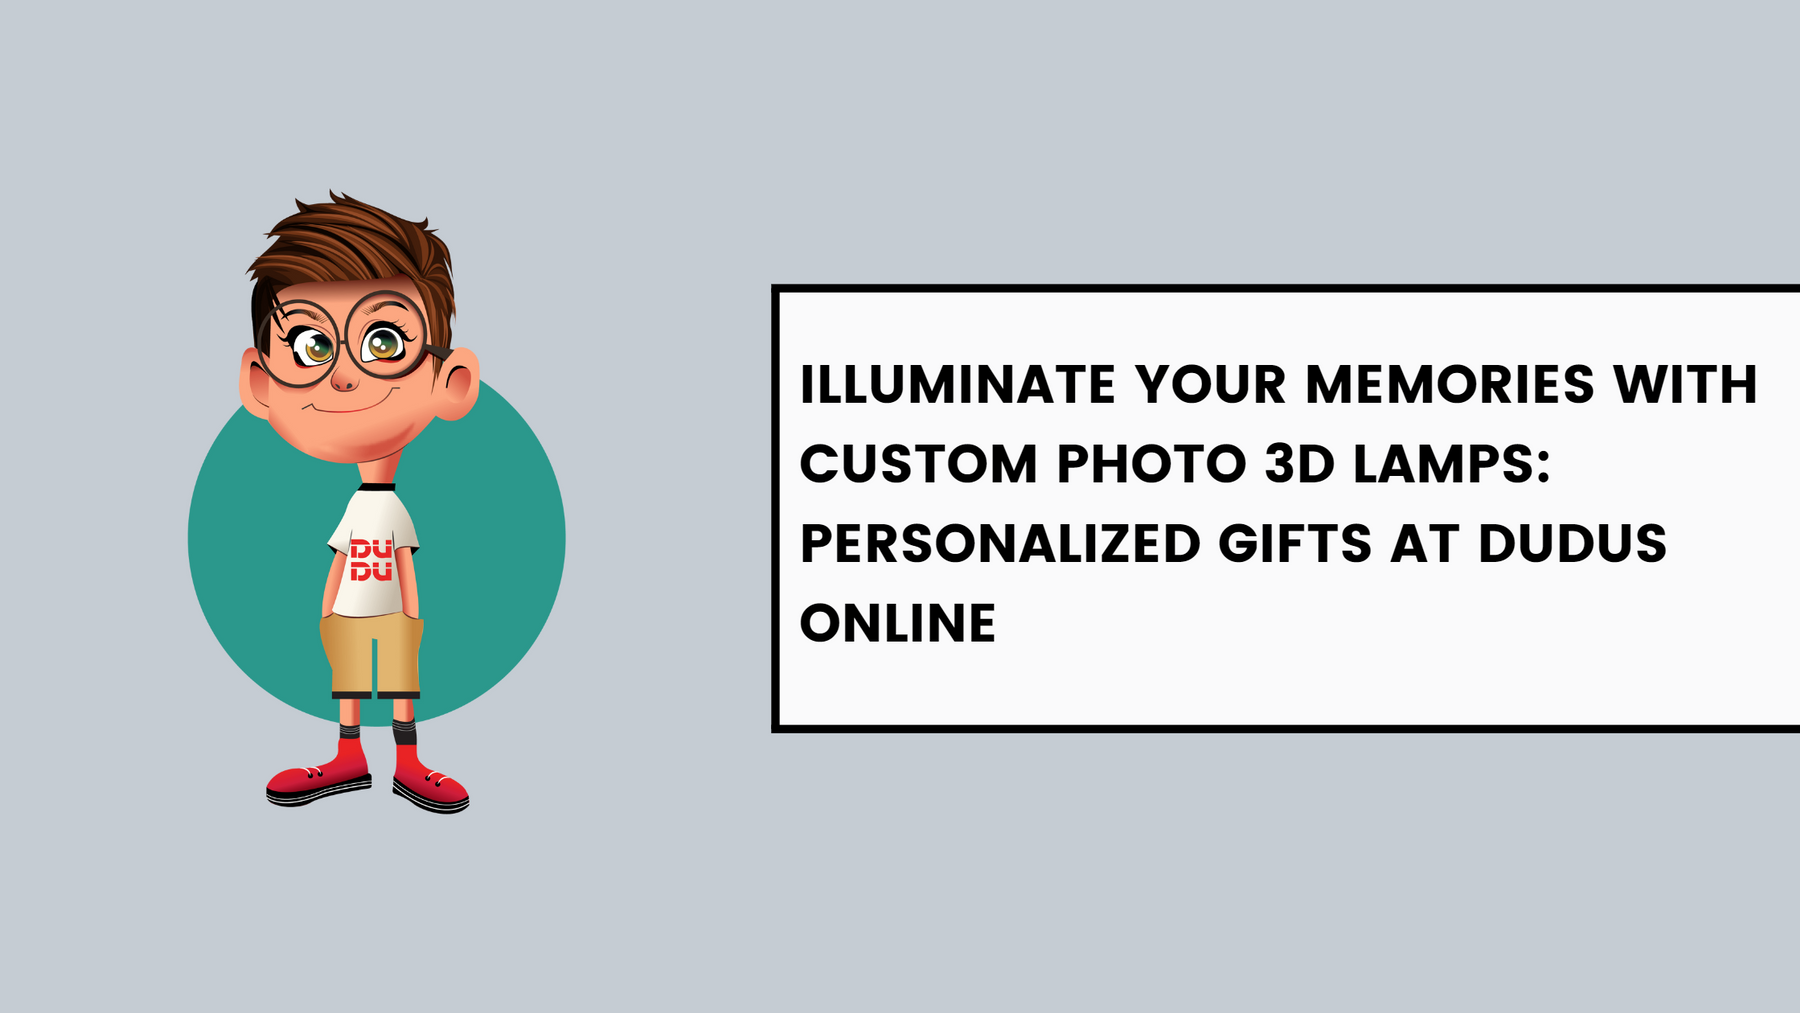 Illuminate Your Memories with Custom Photo 3D Lamps: Personalized Gifts at Dudus Online